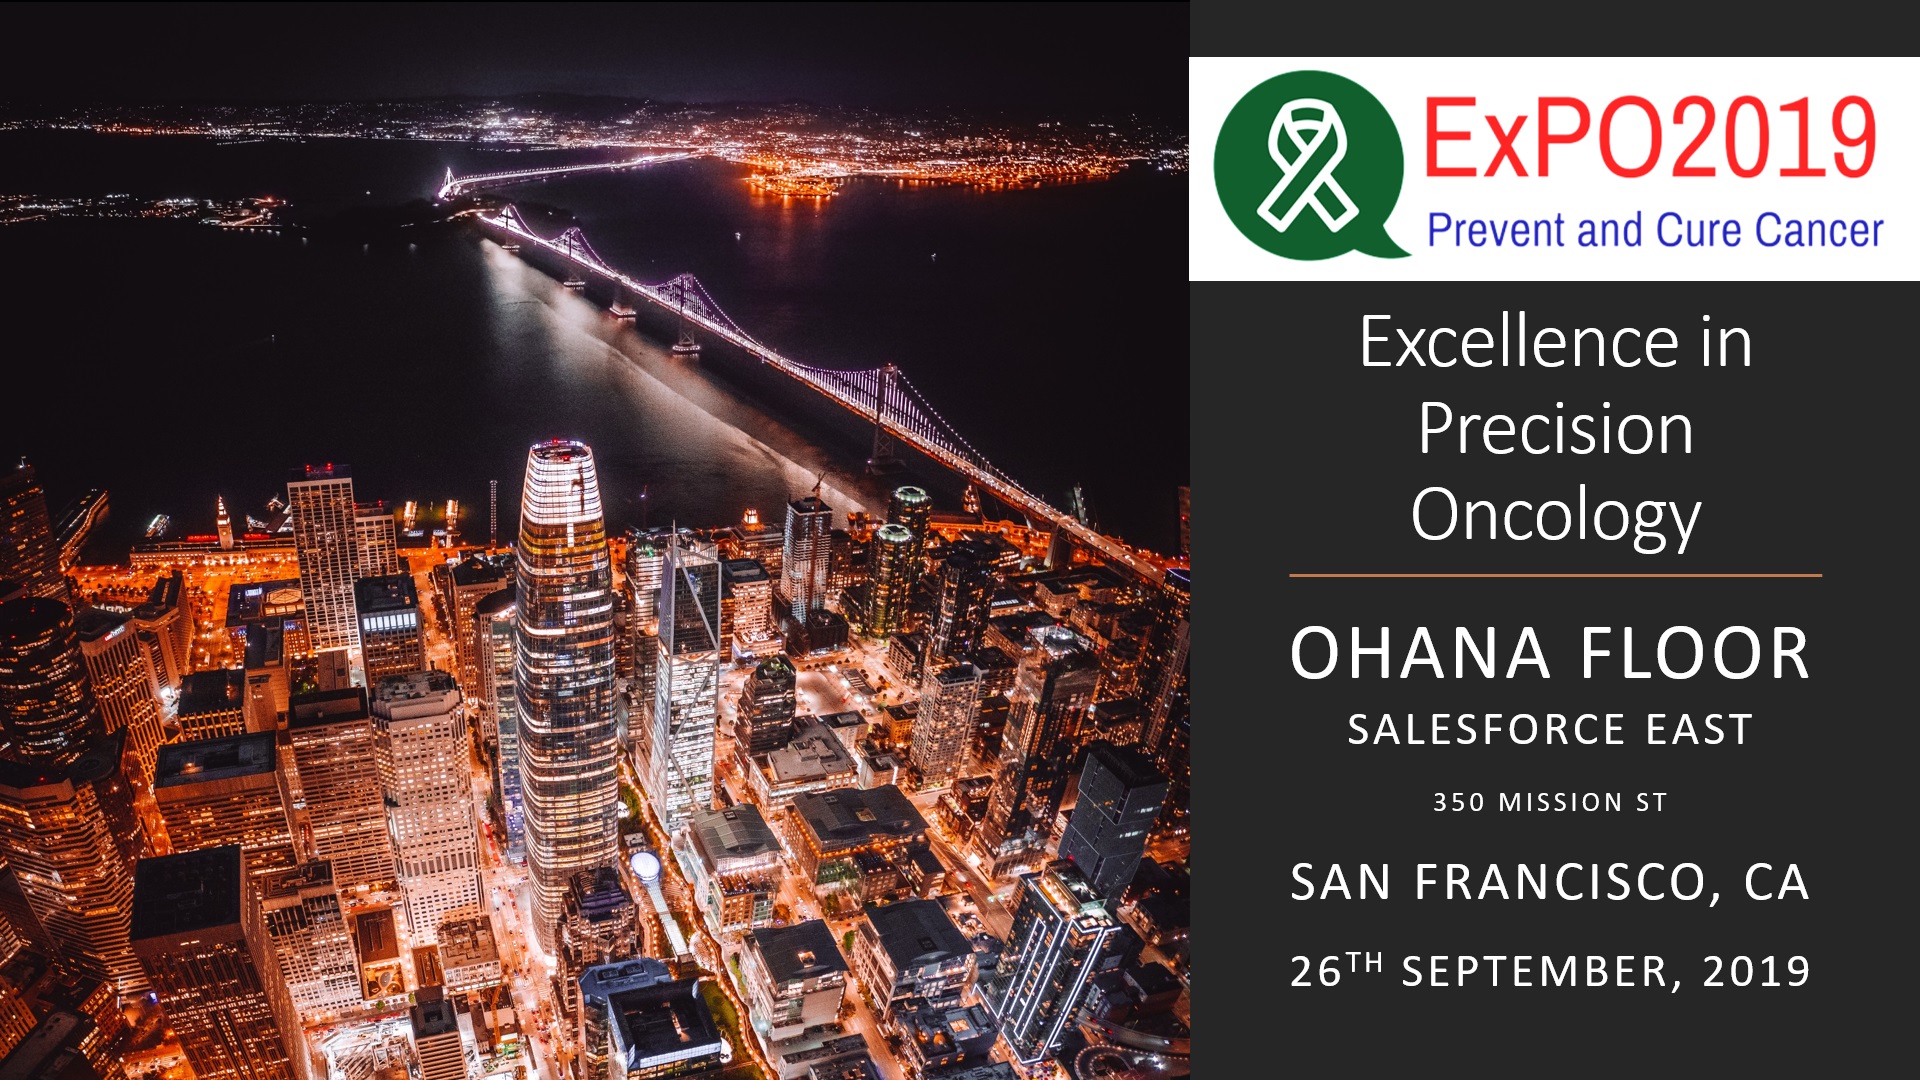 Excellence in Precision Oncology (ExPO2019)